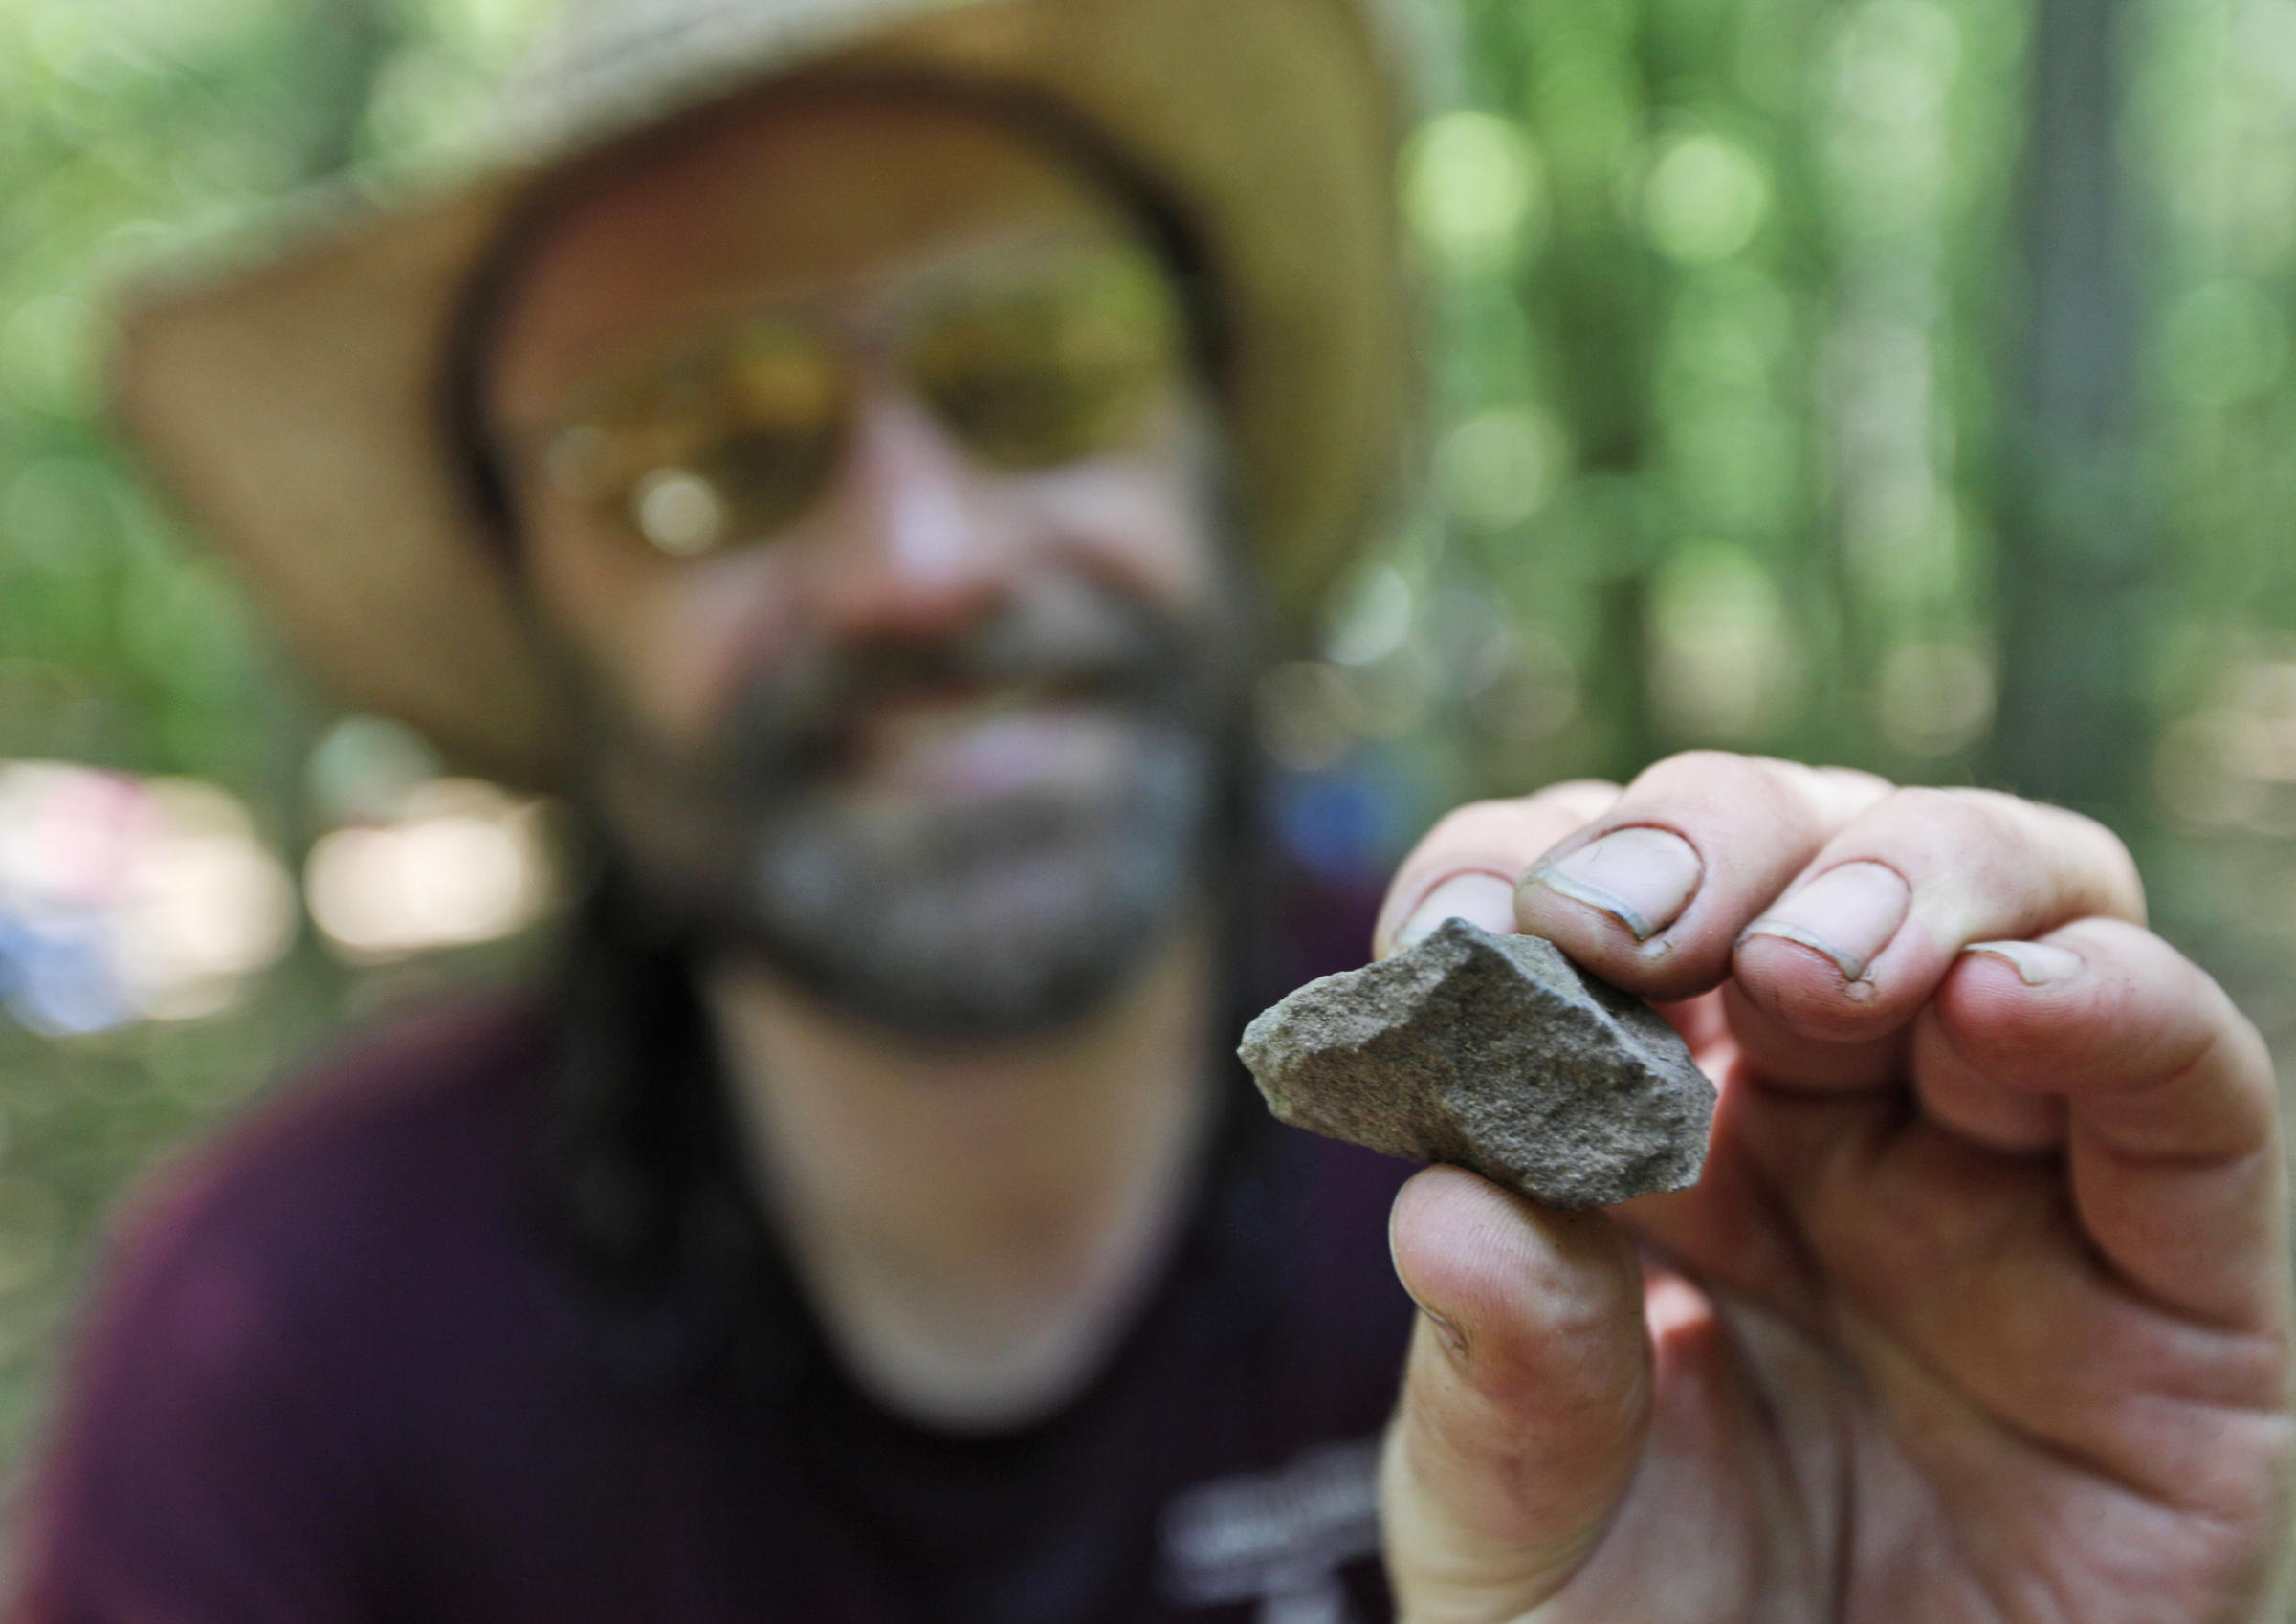 Daniel Sayers has been working for more than a decade in Great Dismal Swamp; here, in 2011, he displays a fire-cracked rock from a dig site. - 373520043